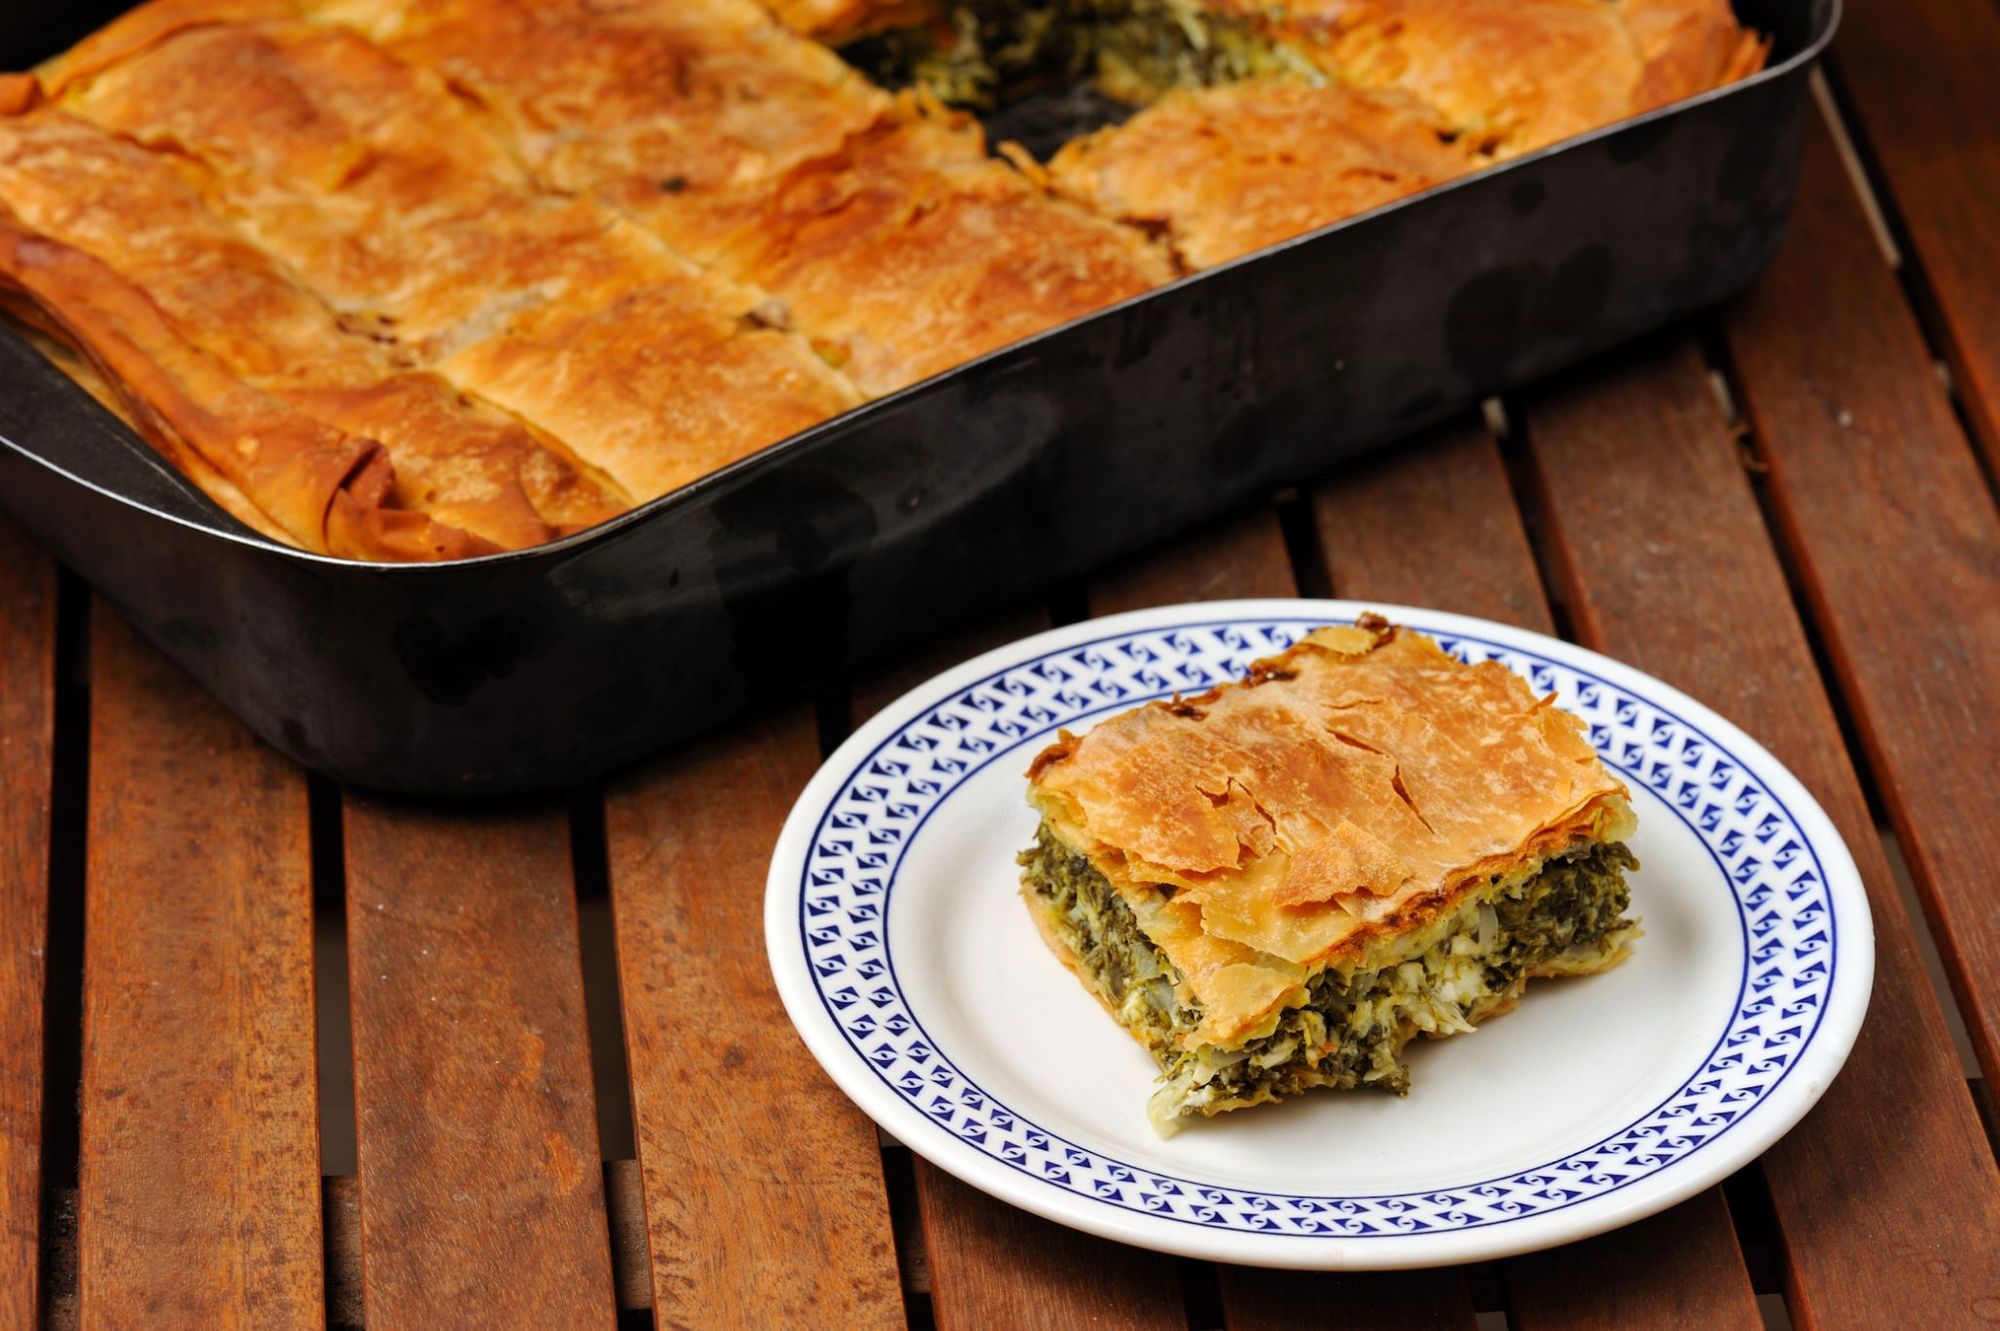 A dish of Spanakopita, Greek spinach and feta pie.